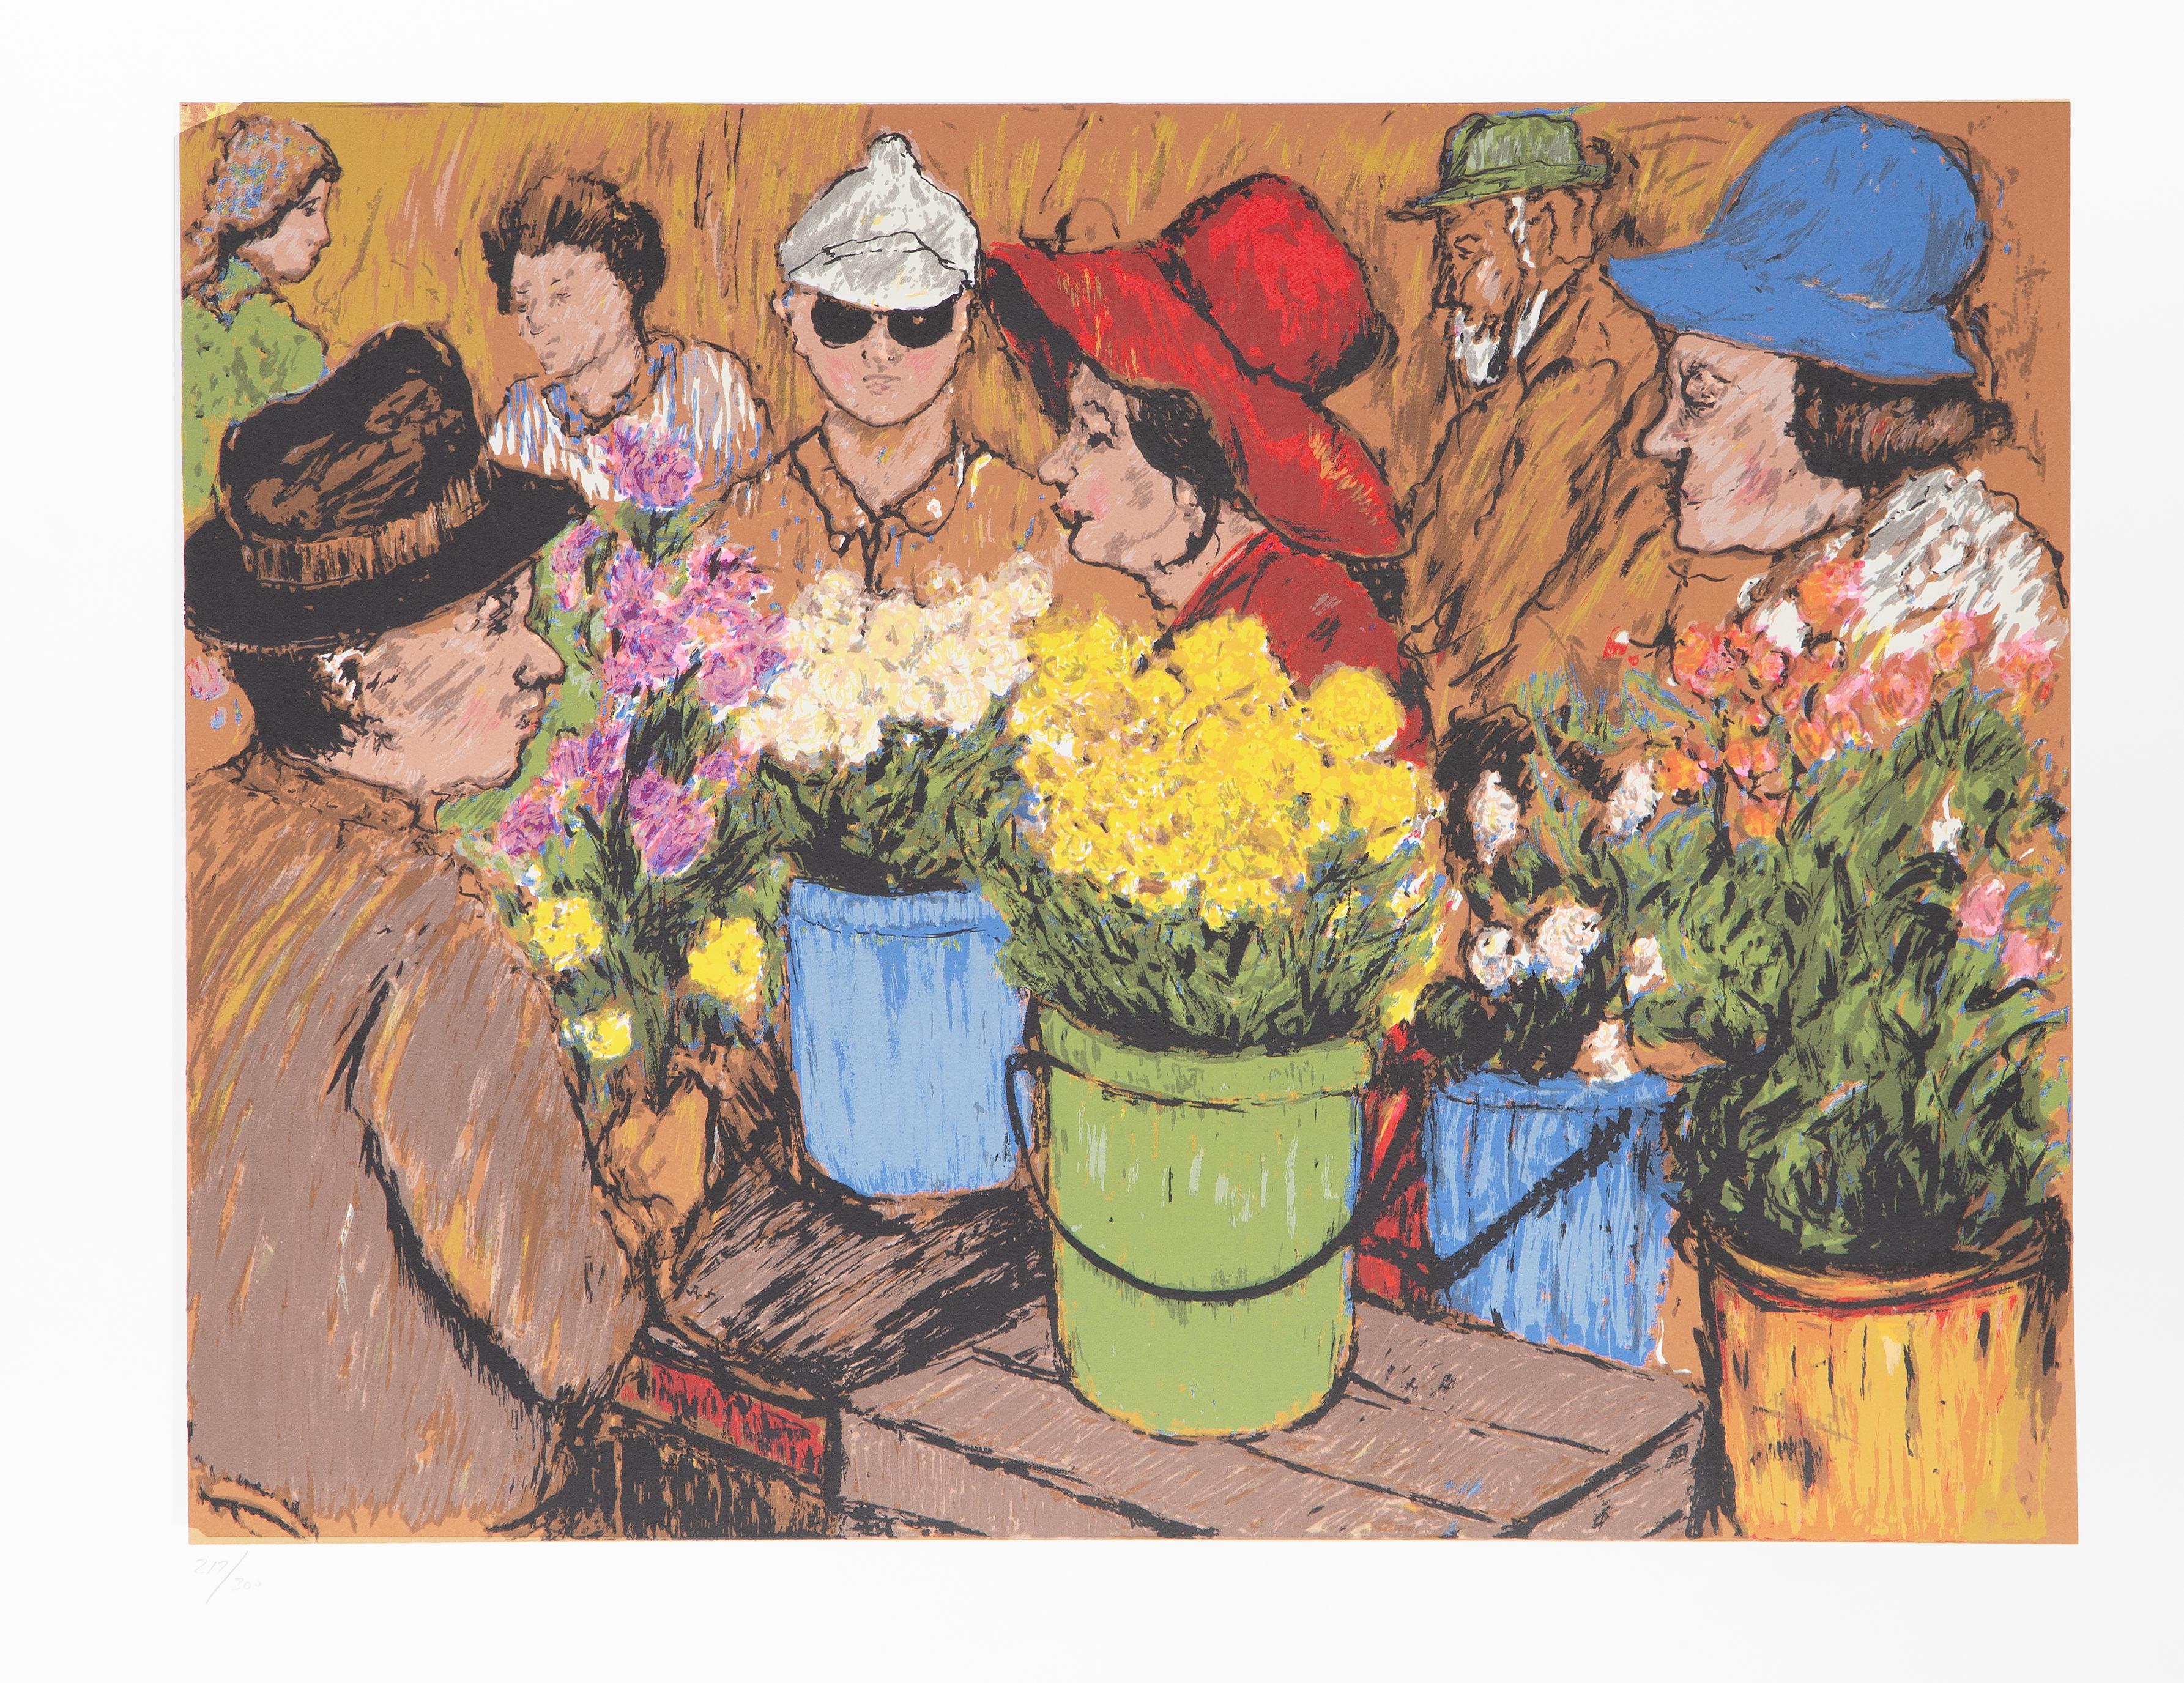 Flower Market
David Azuz, Israeli/French (1942–2014)
Date: circa 1980
Lithograph, numbered in pencil
Edition of 217/300
Image Size: 19.75 x 25.75 inches
Size: 26 x 32.5 in. (66.04 x 82.55 cm)